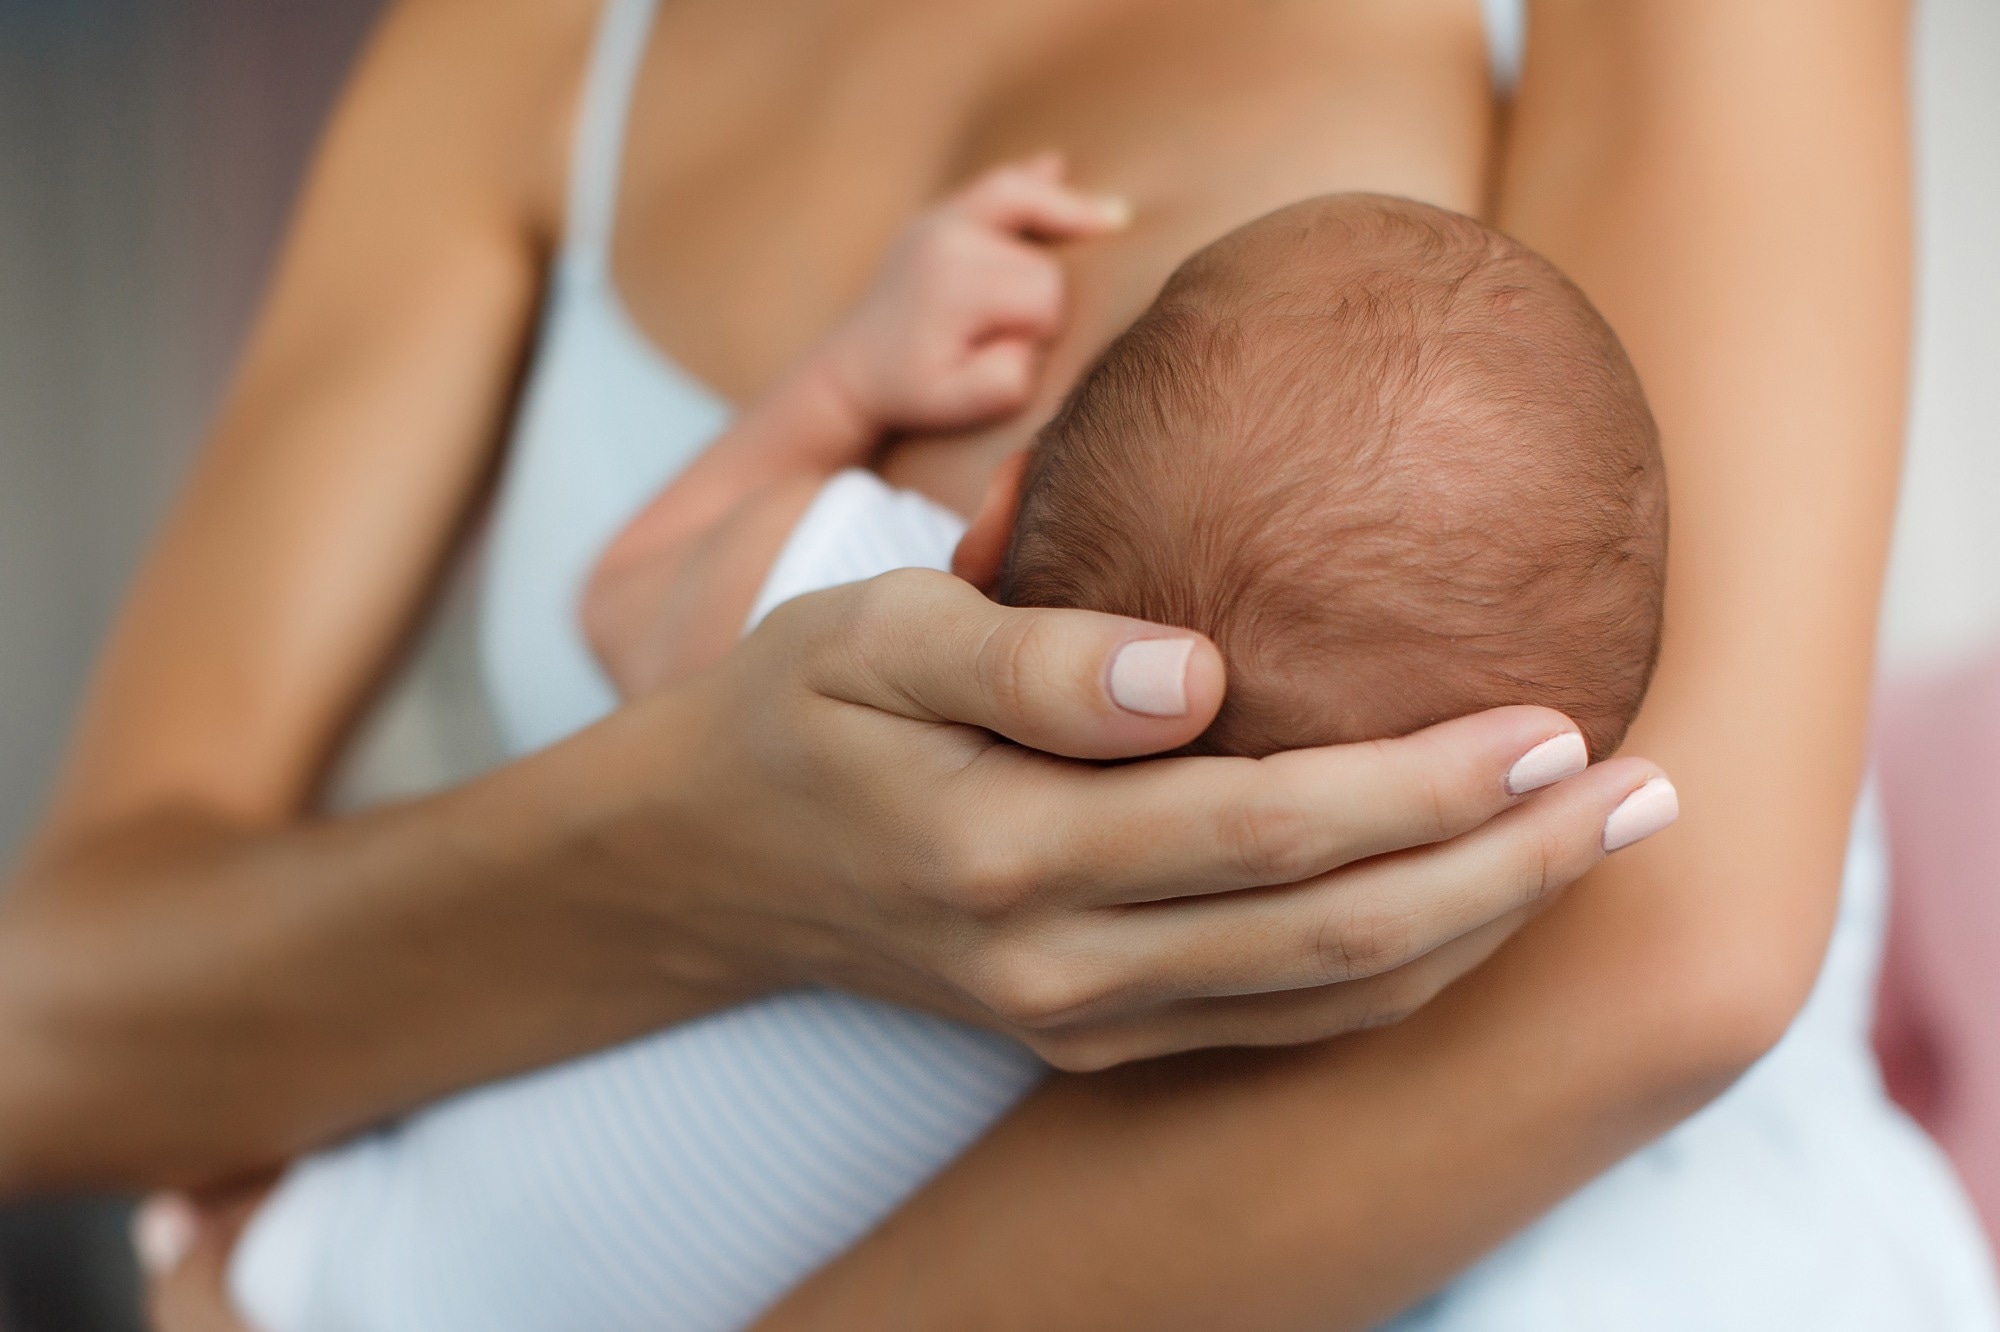 Study: Association of SARS-CoV-2 Infection with Early Breastfeeding. Image Credit: HTeam / Shutterstock